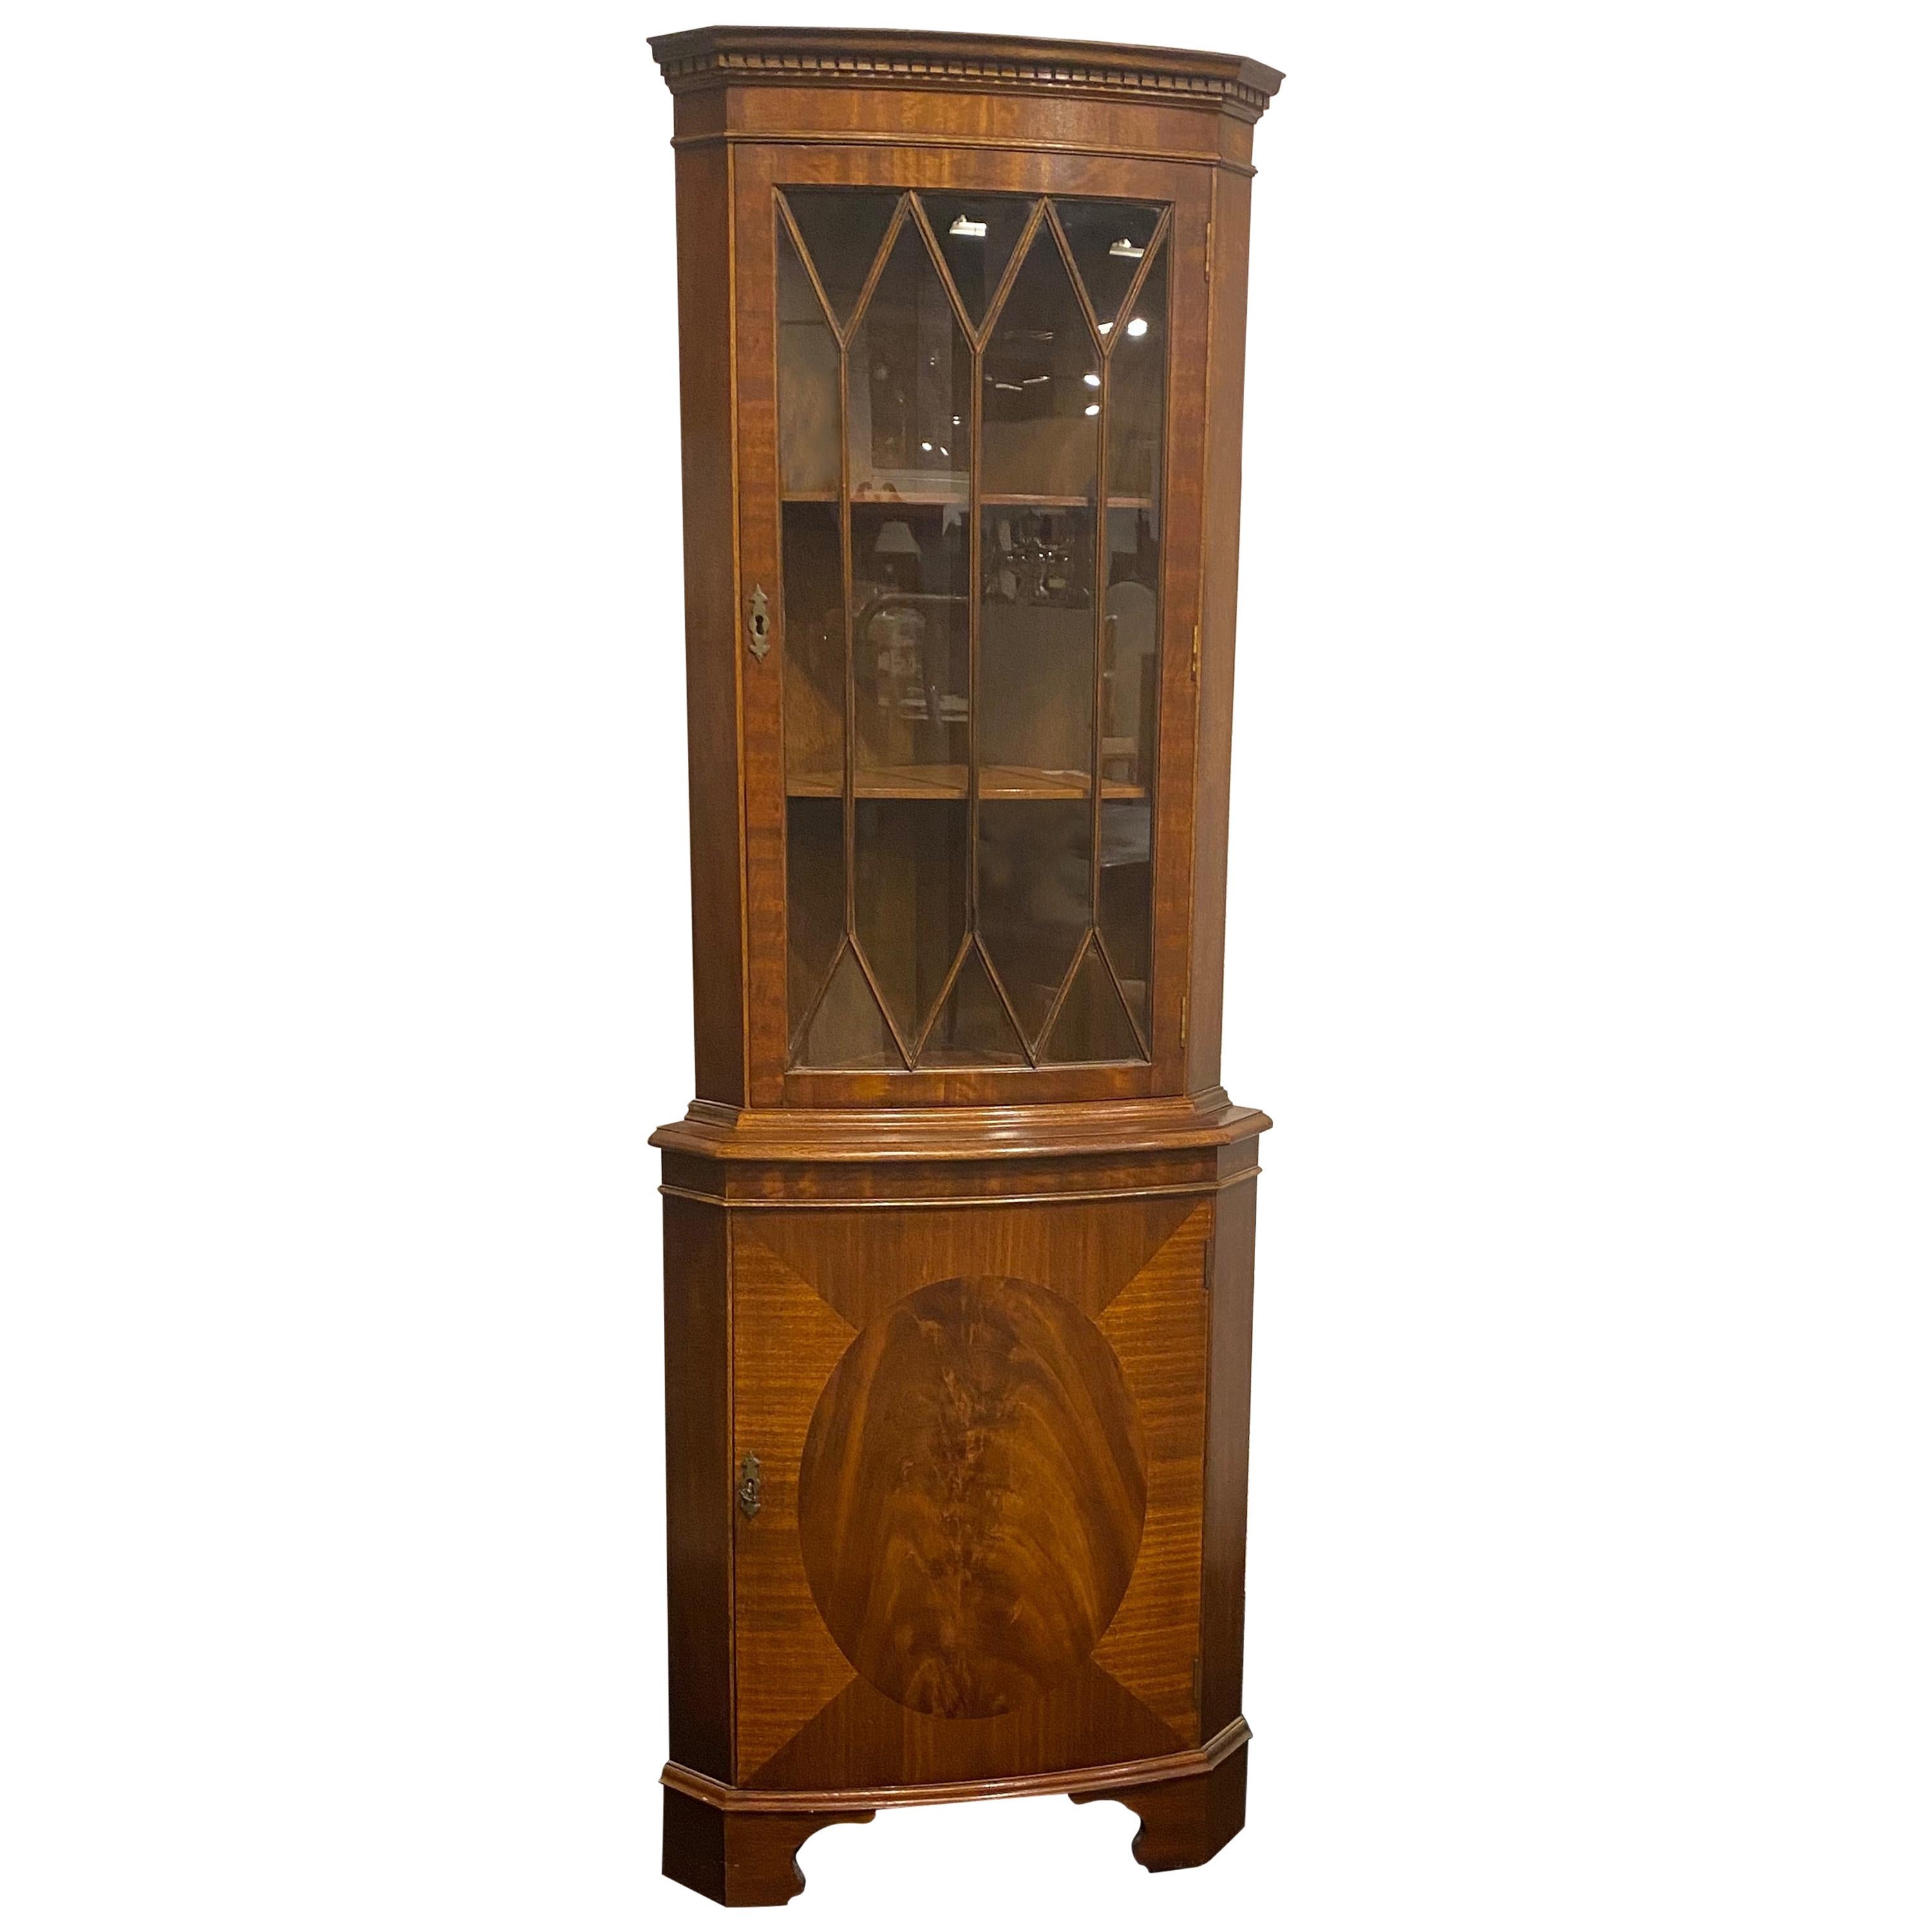 Mahogany English Corner Cabinet by Bevan Funnel, Reprodux, Curved Front Shape